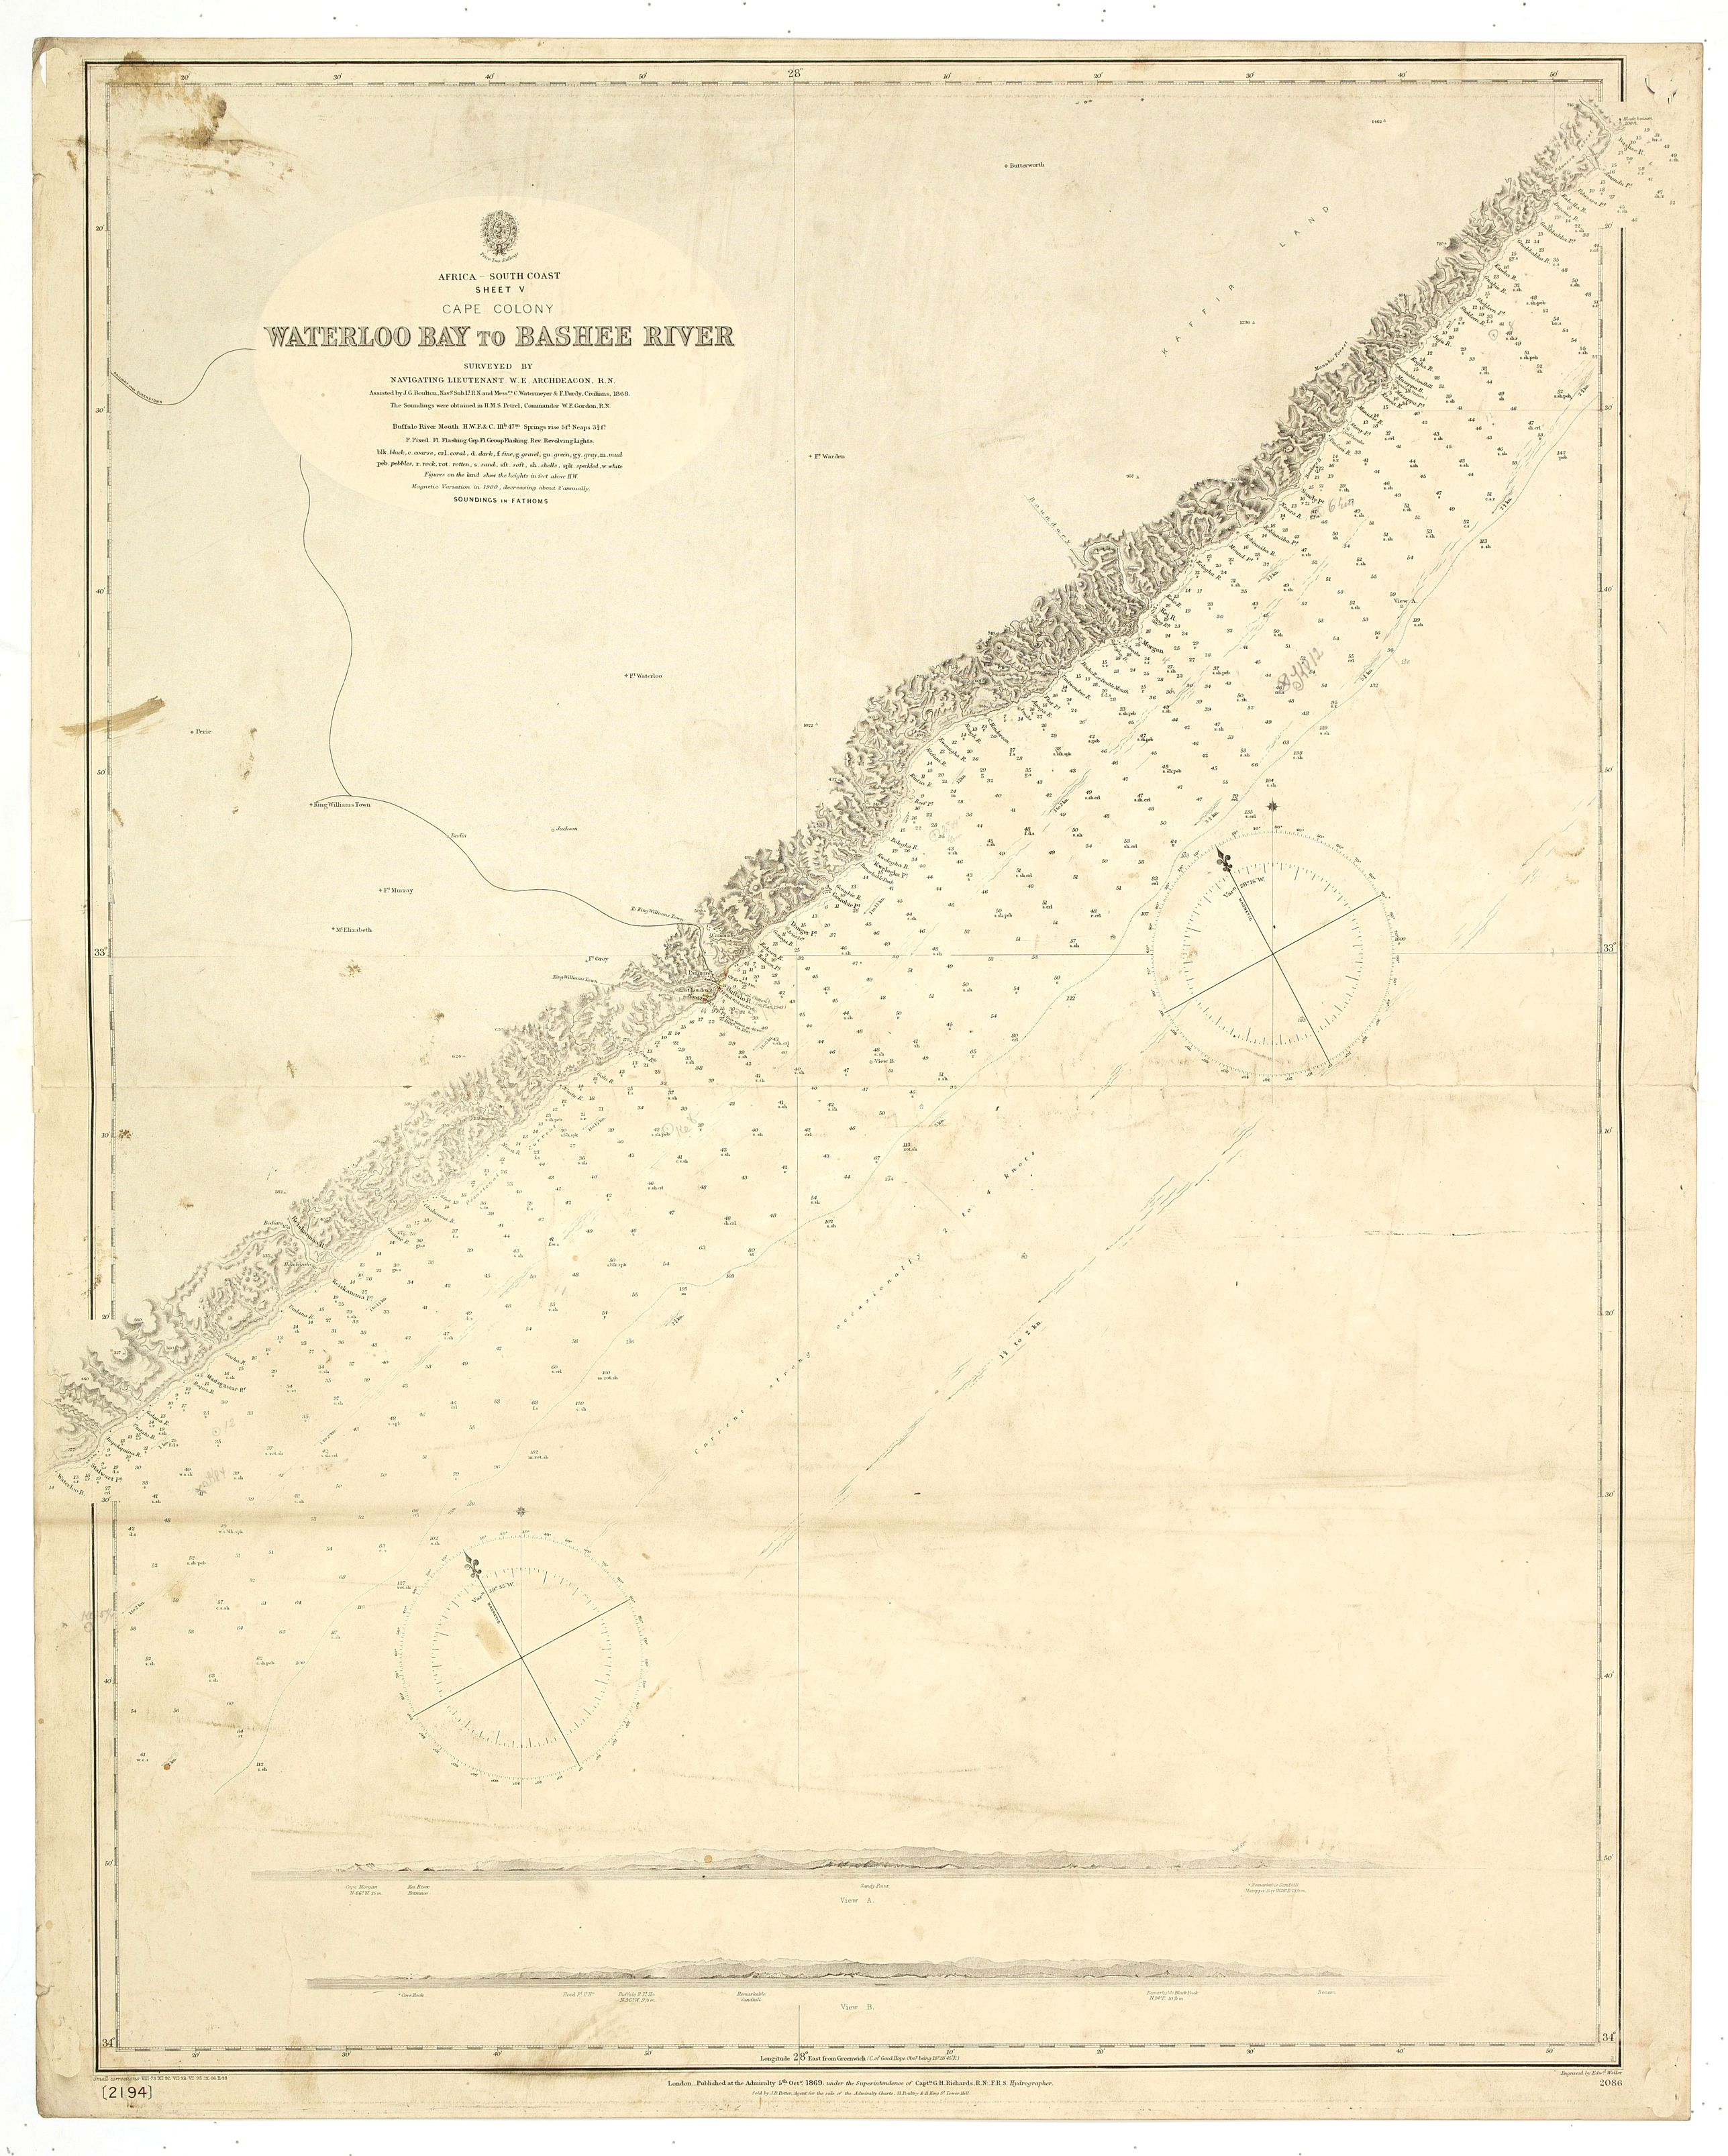 	Africa south coast sheet V Cape Colony Waterloo Bay to Bashee River surveyed by Navigating Lieutenant WE Archdeacon RN assisted by ... Africa - SW coast Table Bay surveyed by Mr F Skead Master RN assisted by Mr Charles Watermeyer 1858-60